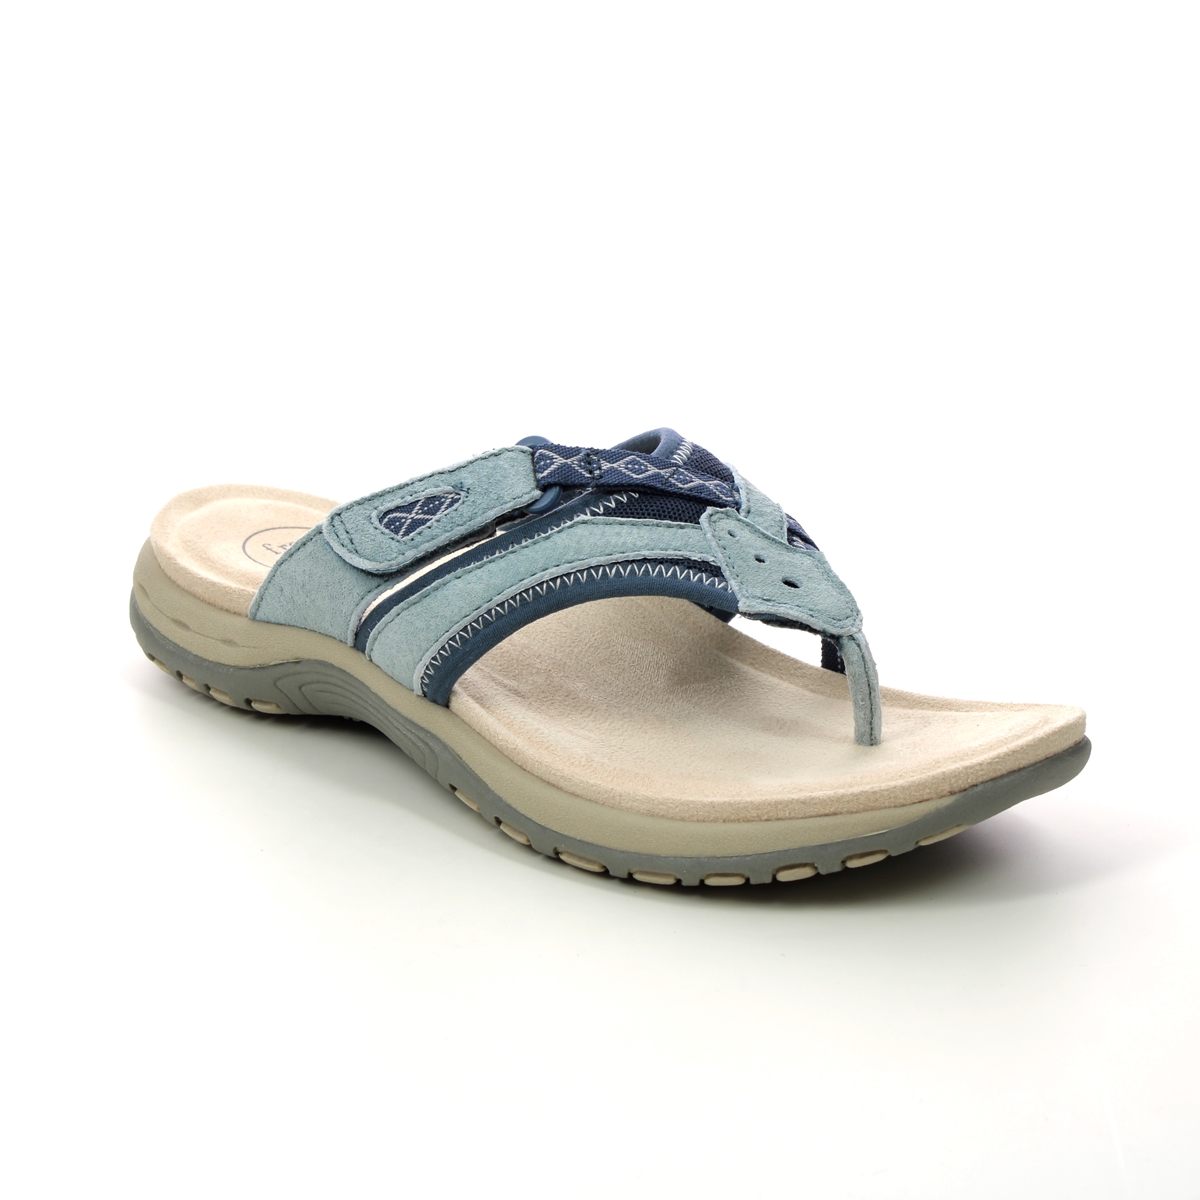 Earth Spirit Juliet 01 Blue Suede Womens Toe Post Sandals 40511-72 in a Plain Leather in Size 3